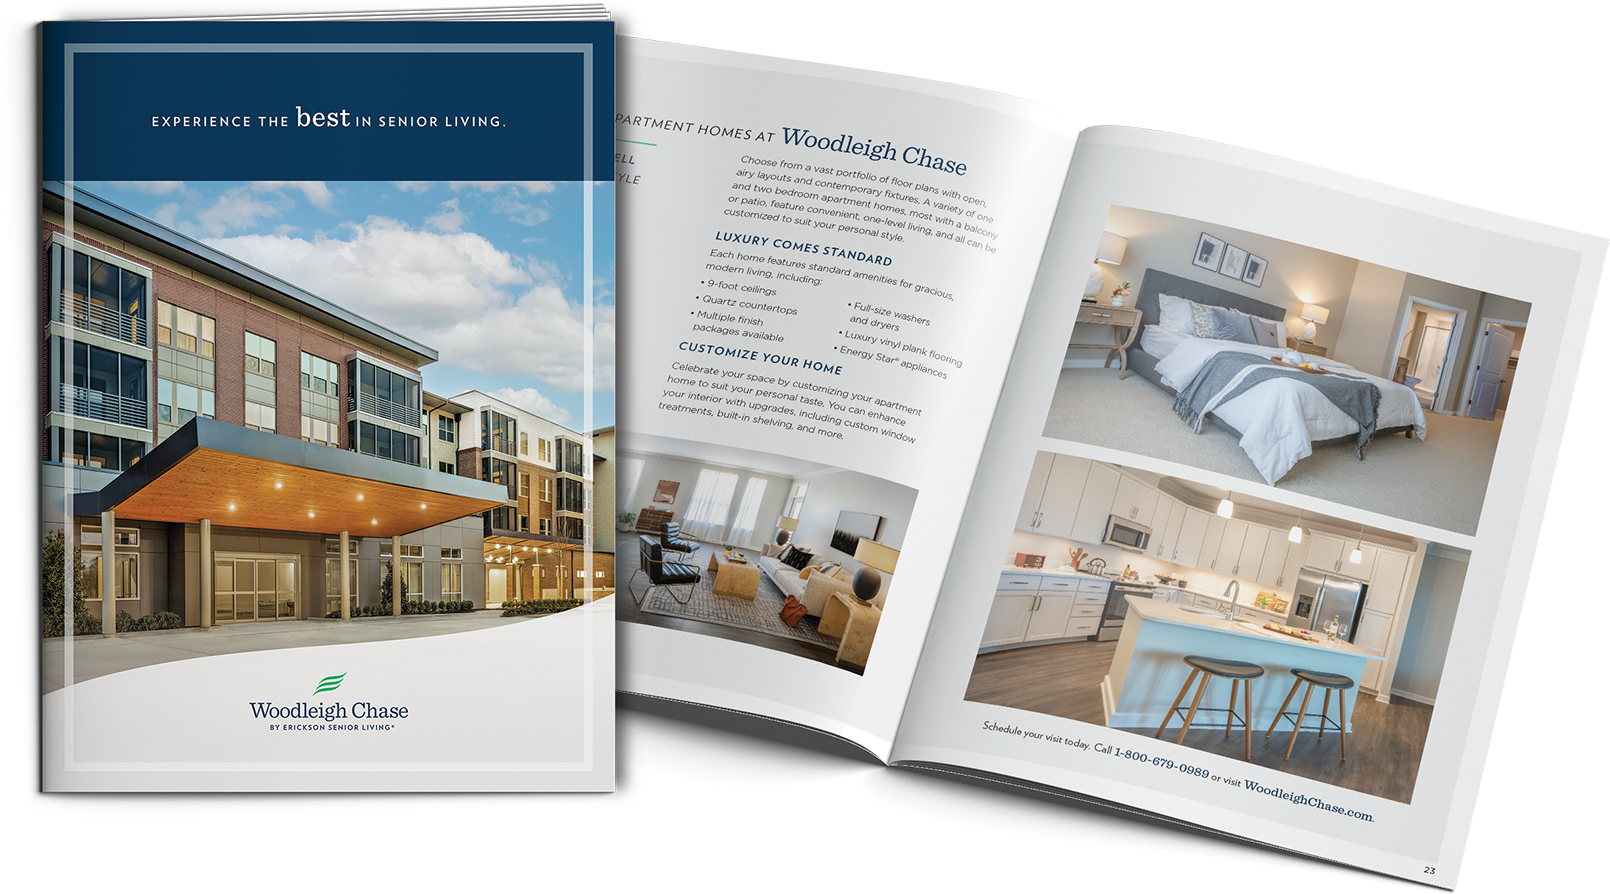 Woodleigh Chase brochure cover and interior spread.